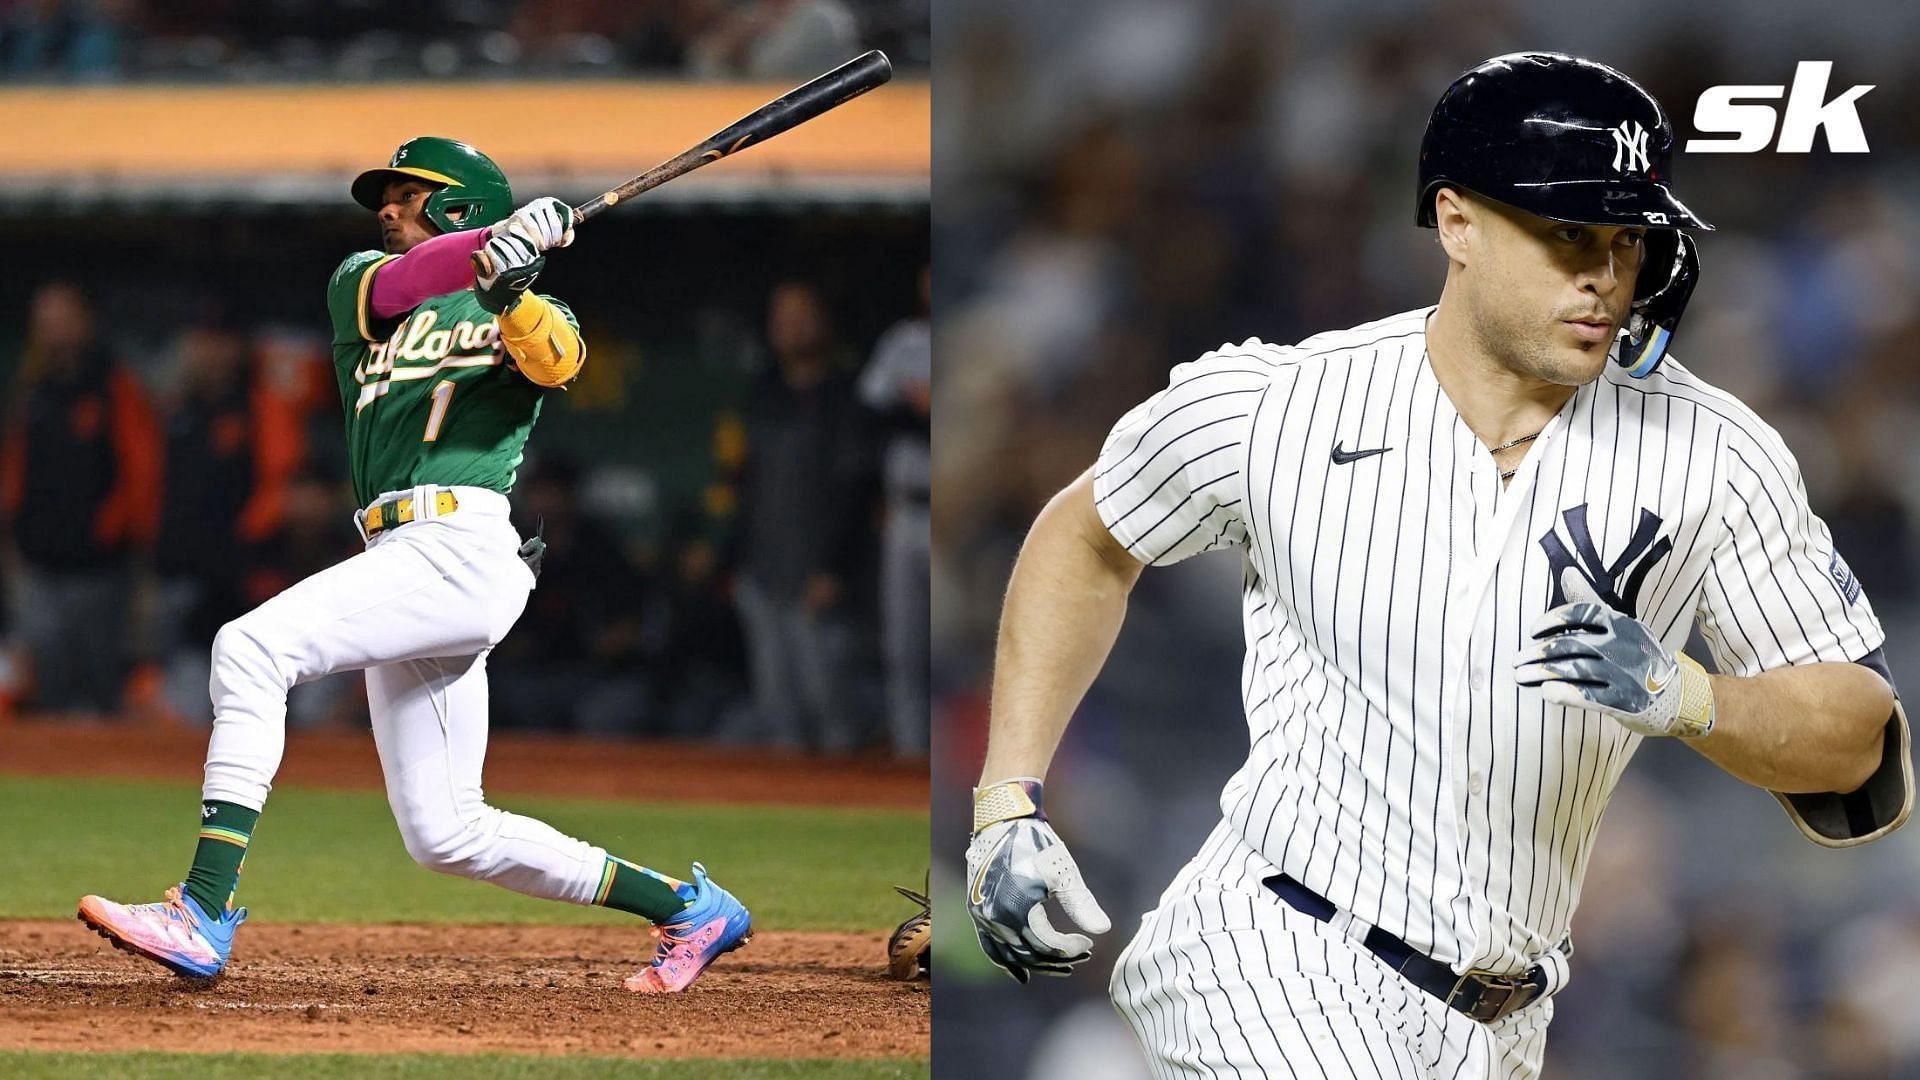 Esteury Ruiz and Giancarlo Stanton could help MLB fantasy managers late in drafts